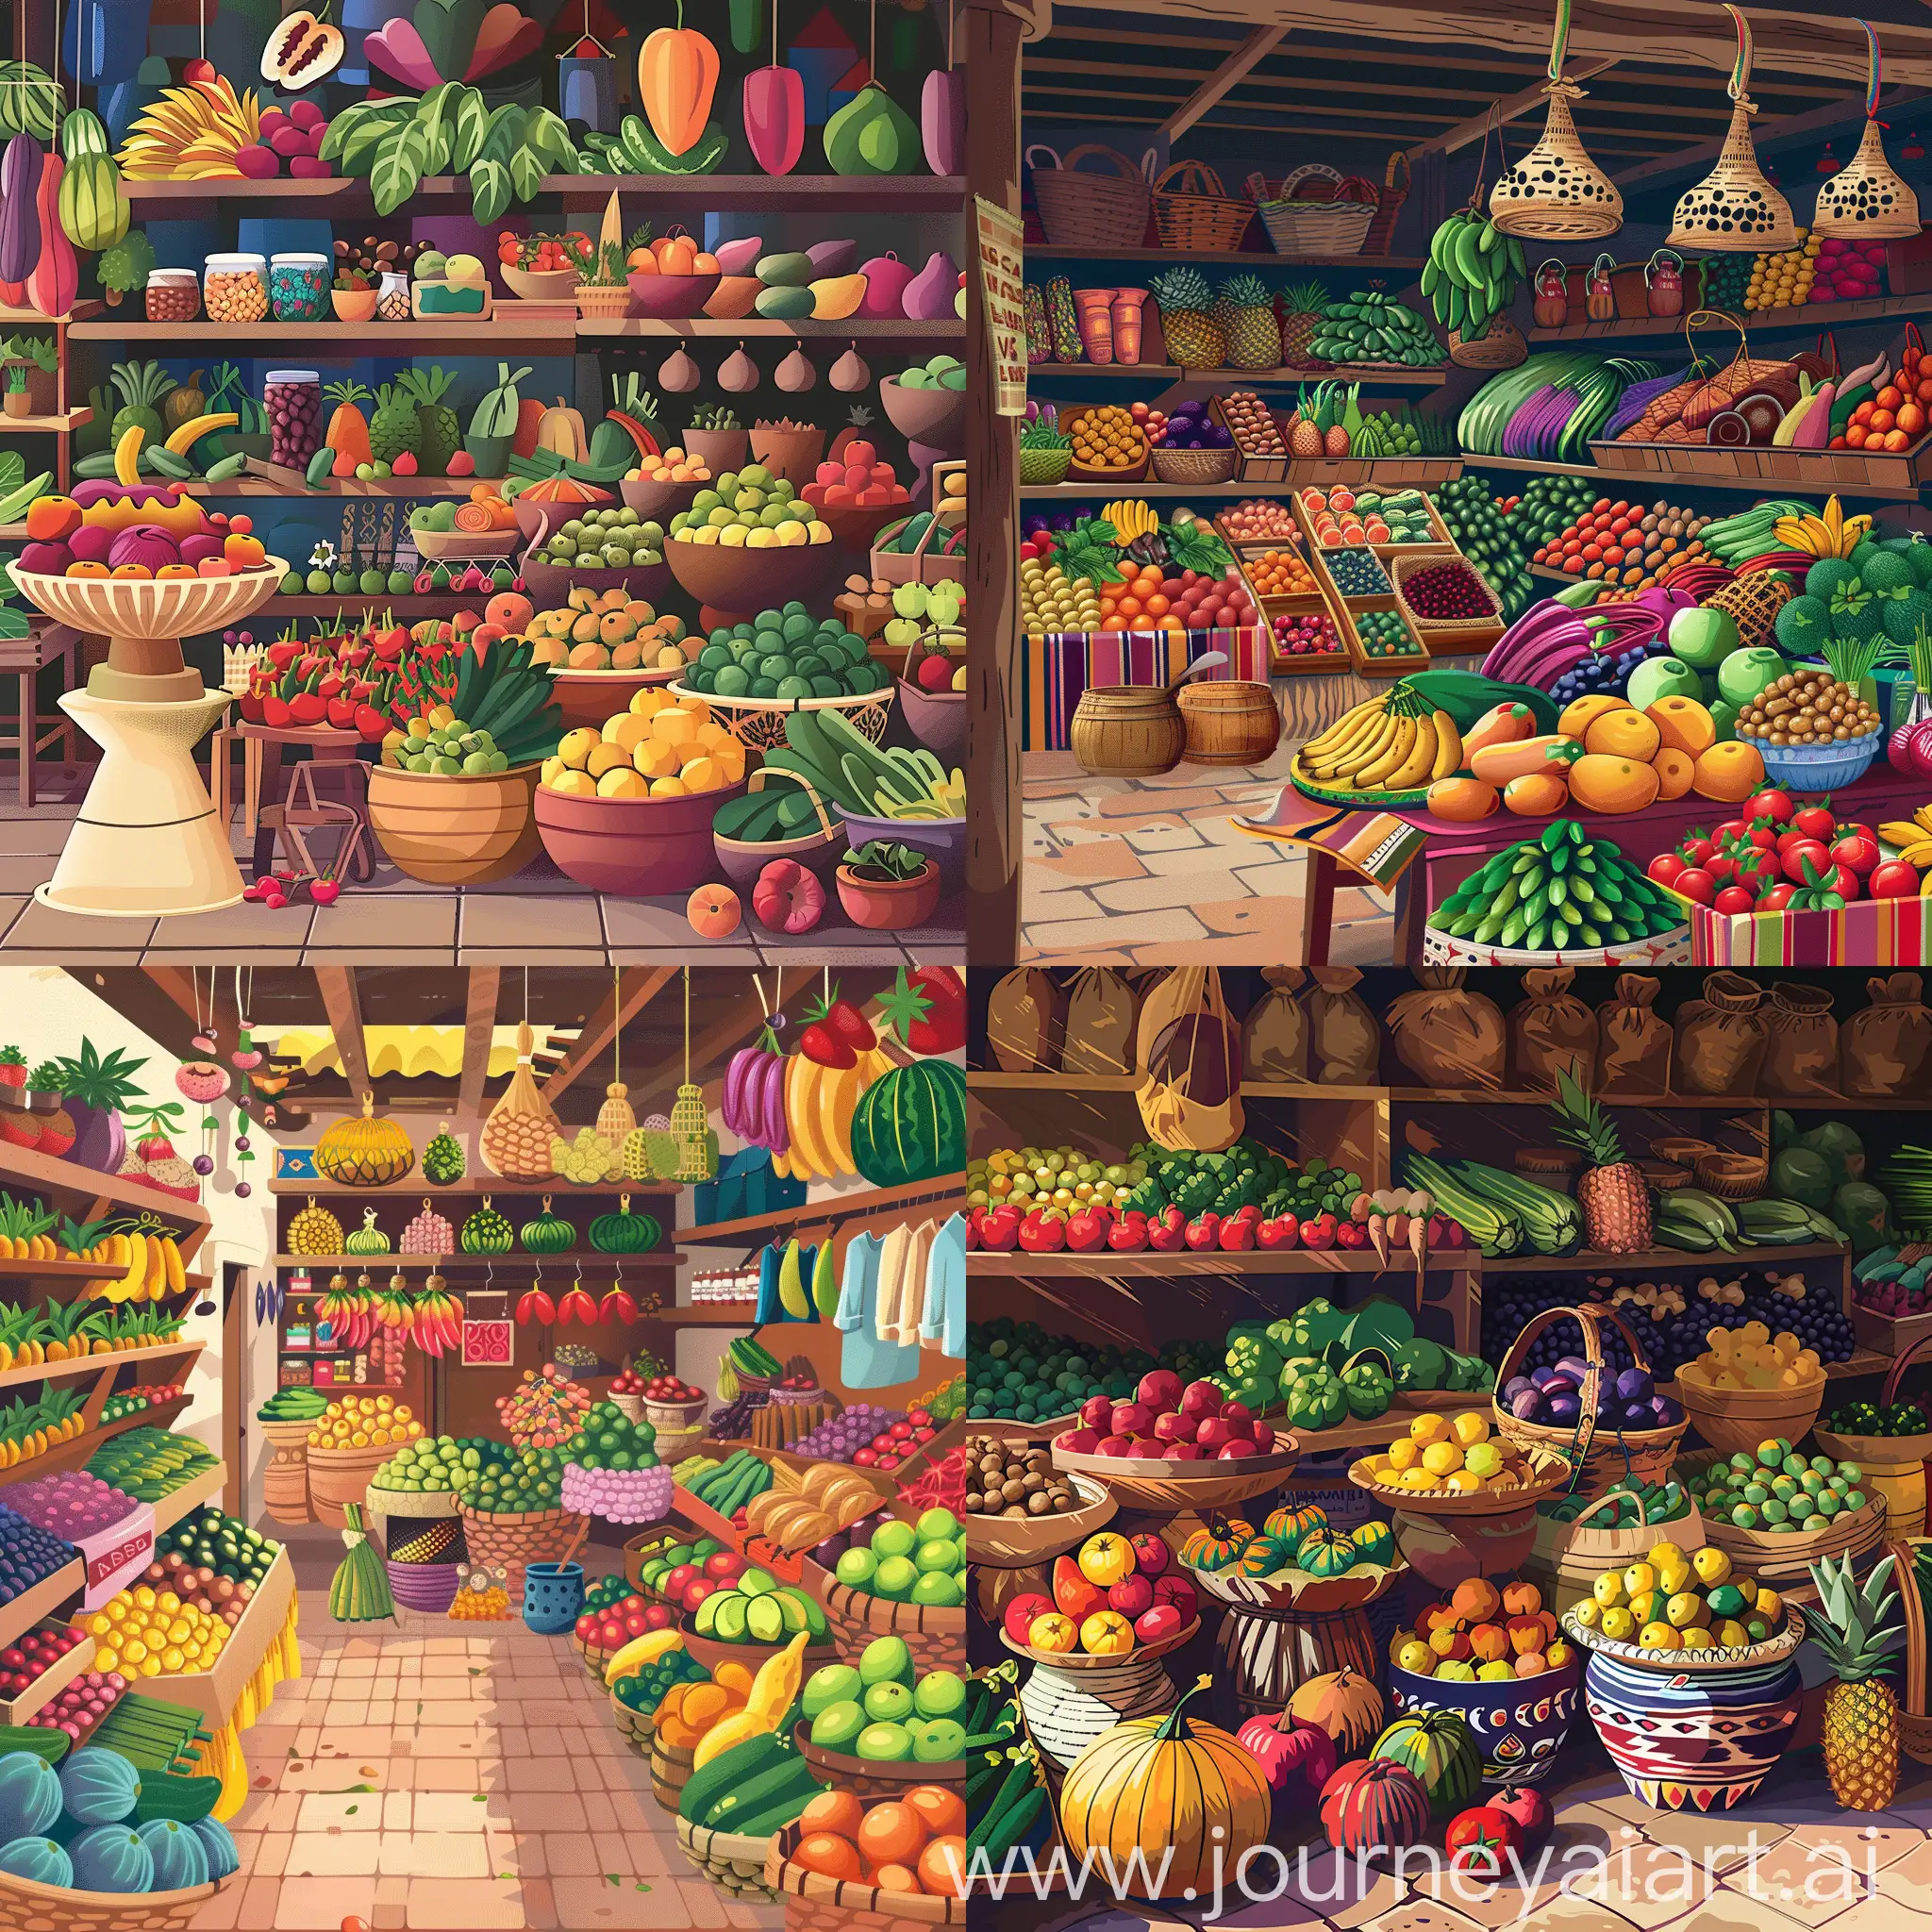 Colorful-Paraguayan-Market-with-Fruits-Vegetables-and-Handicrafts